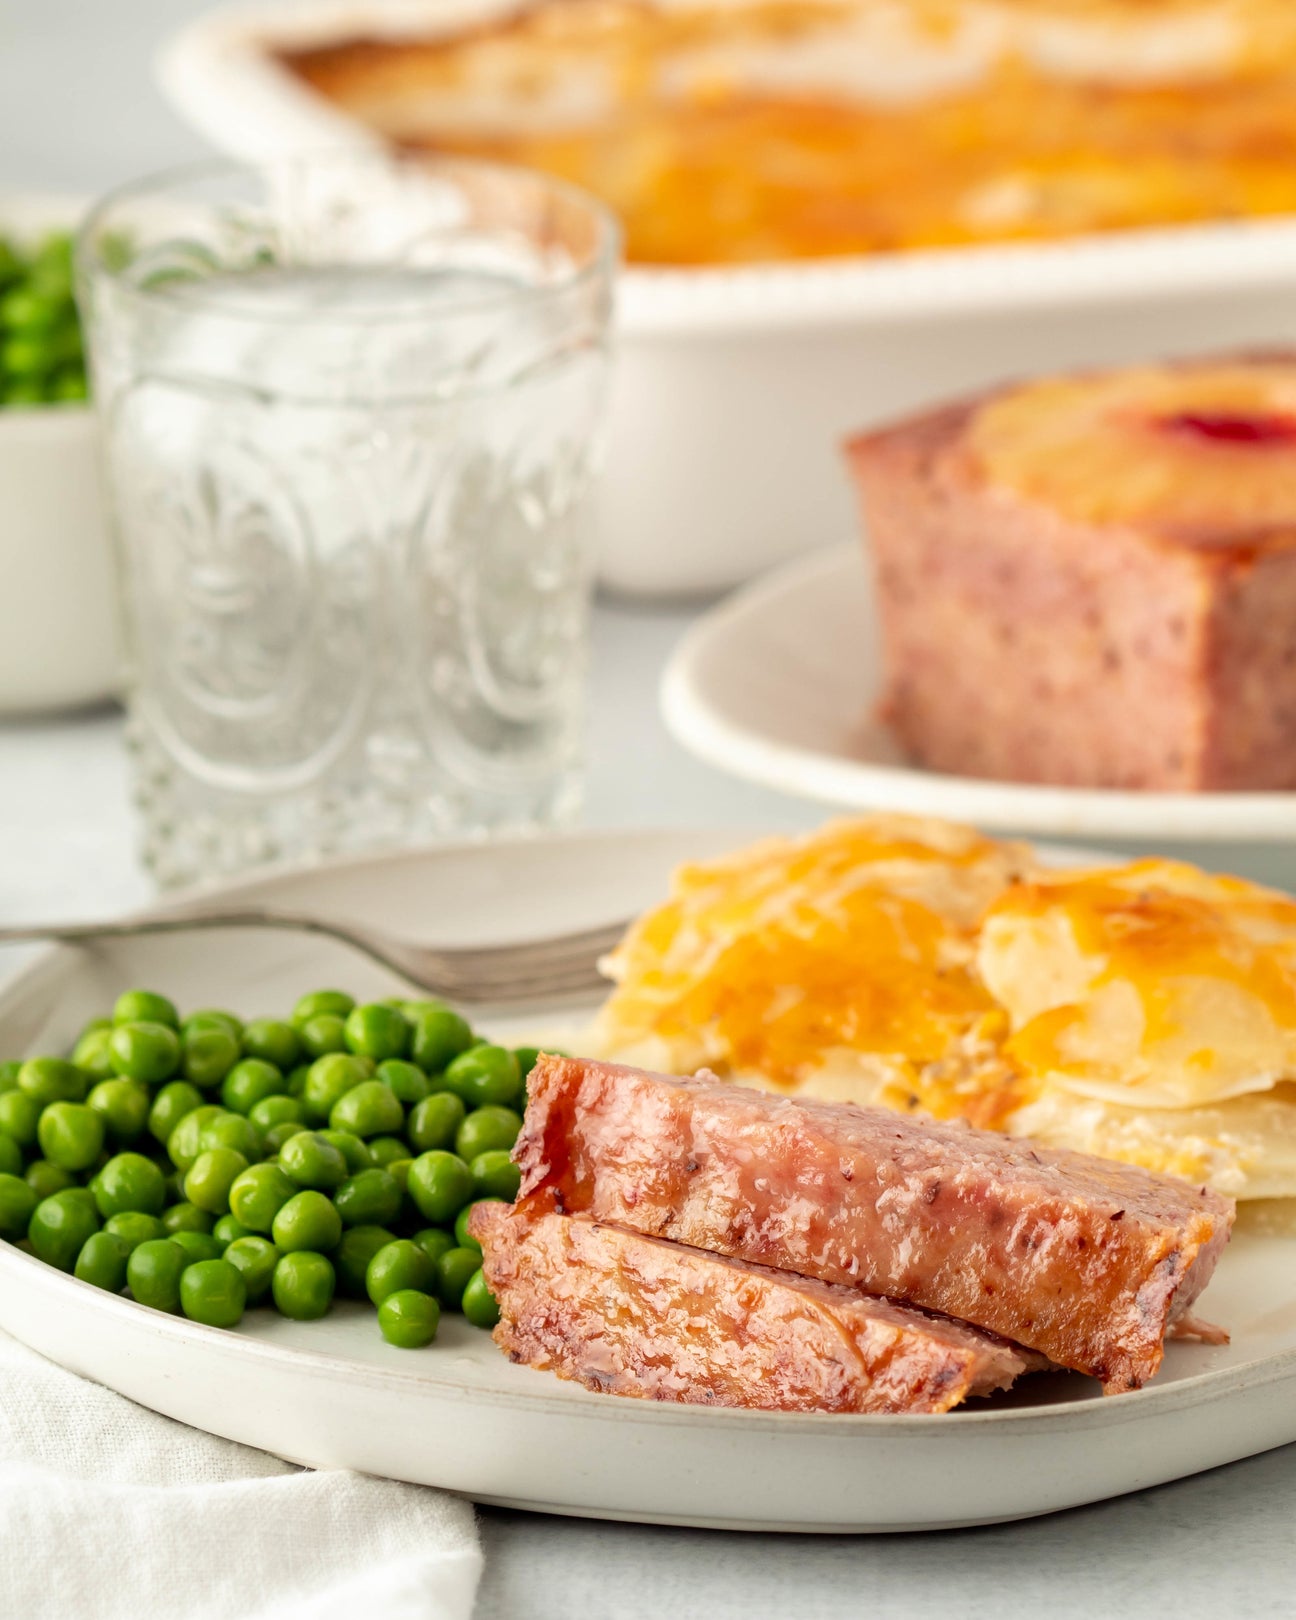 Hamloaf on a plate with peas and potatoes